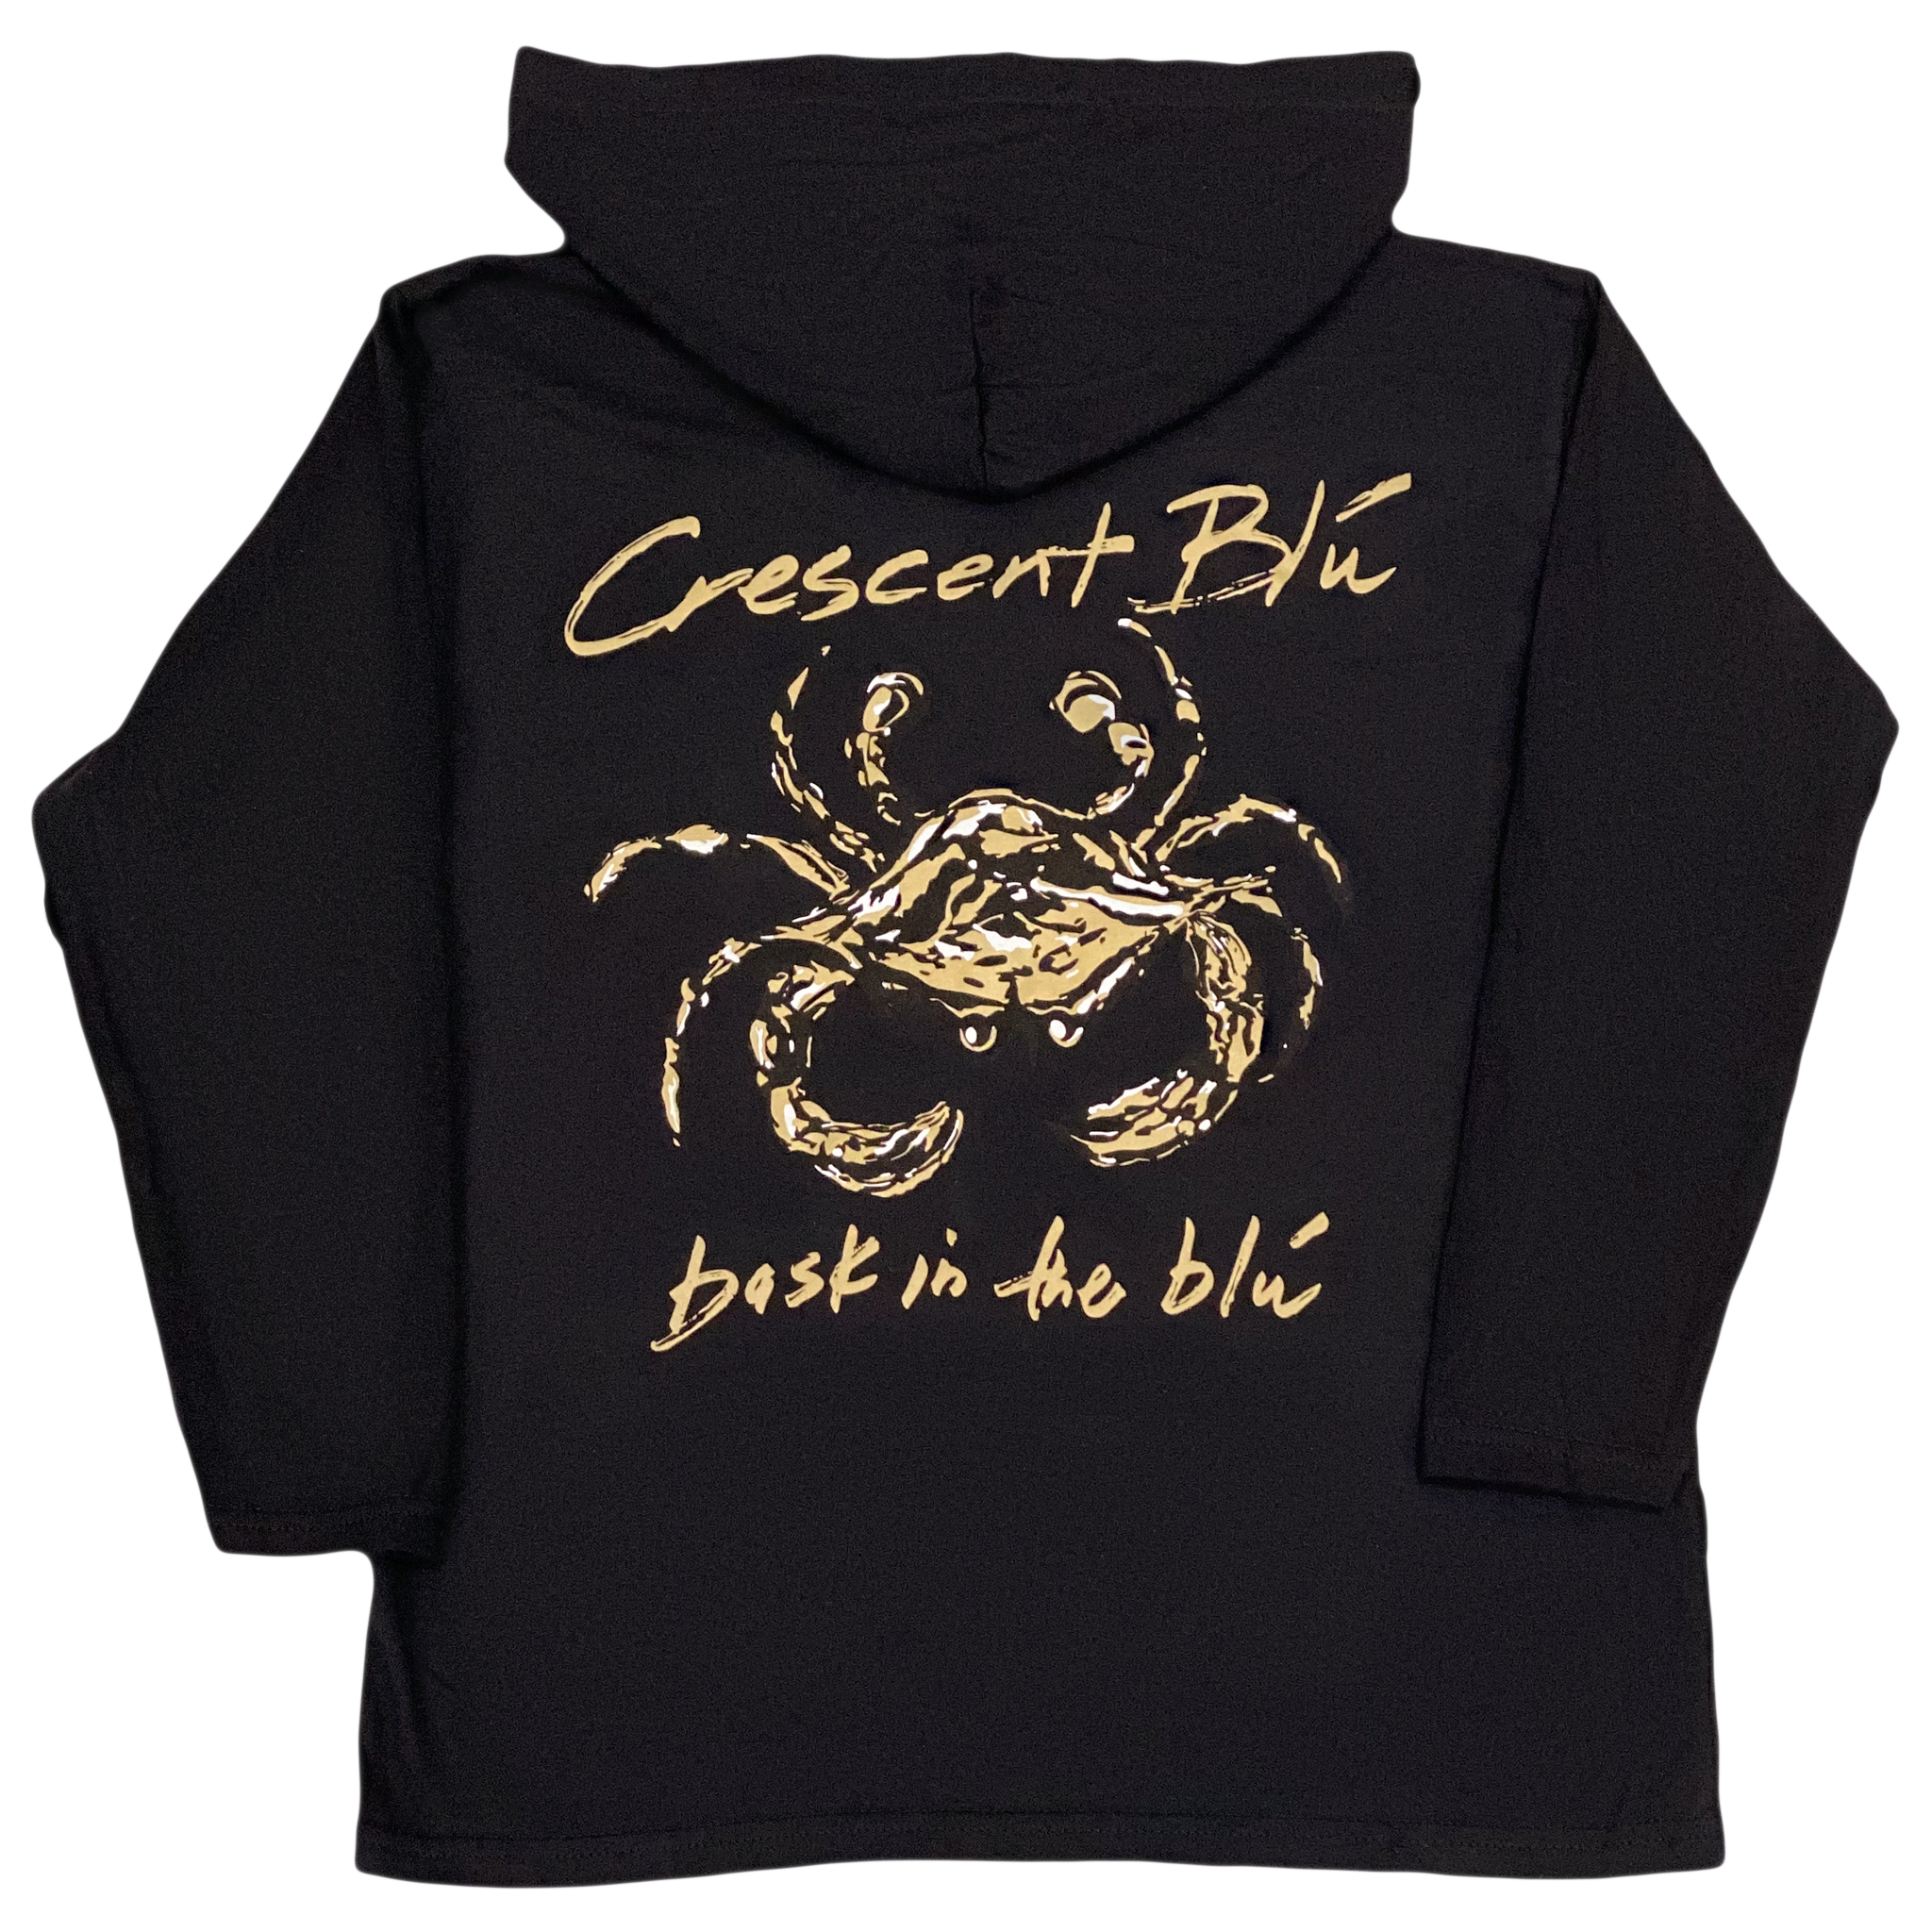 The back of a black long sleeve hooded cotton t-shirt. Across the upper back, Crescent Blu is written in gold above a black, gold, and white crab. Beneath the crab, written in gold, is bask in the blu. Sleeves and shirt bottom have t-shirt hems.